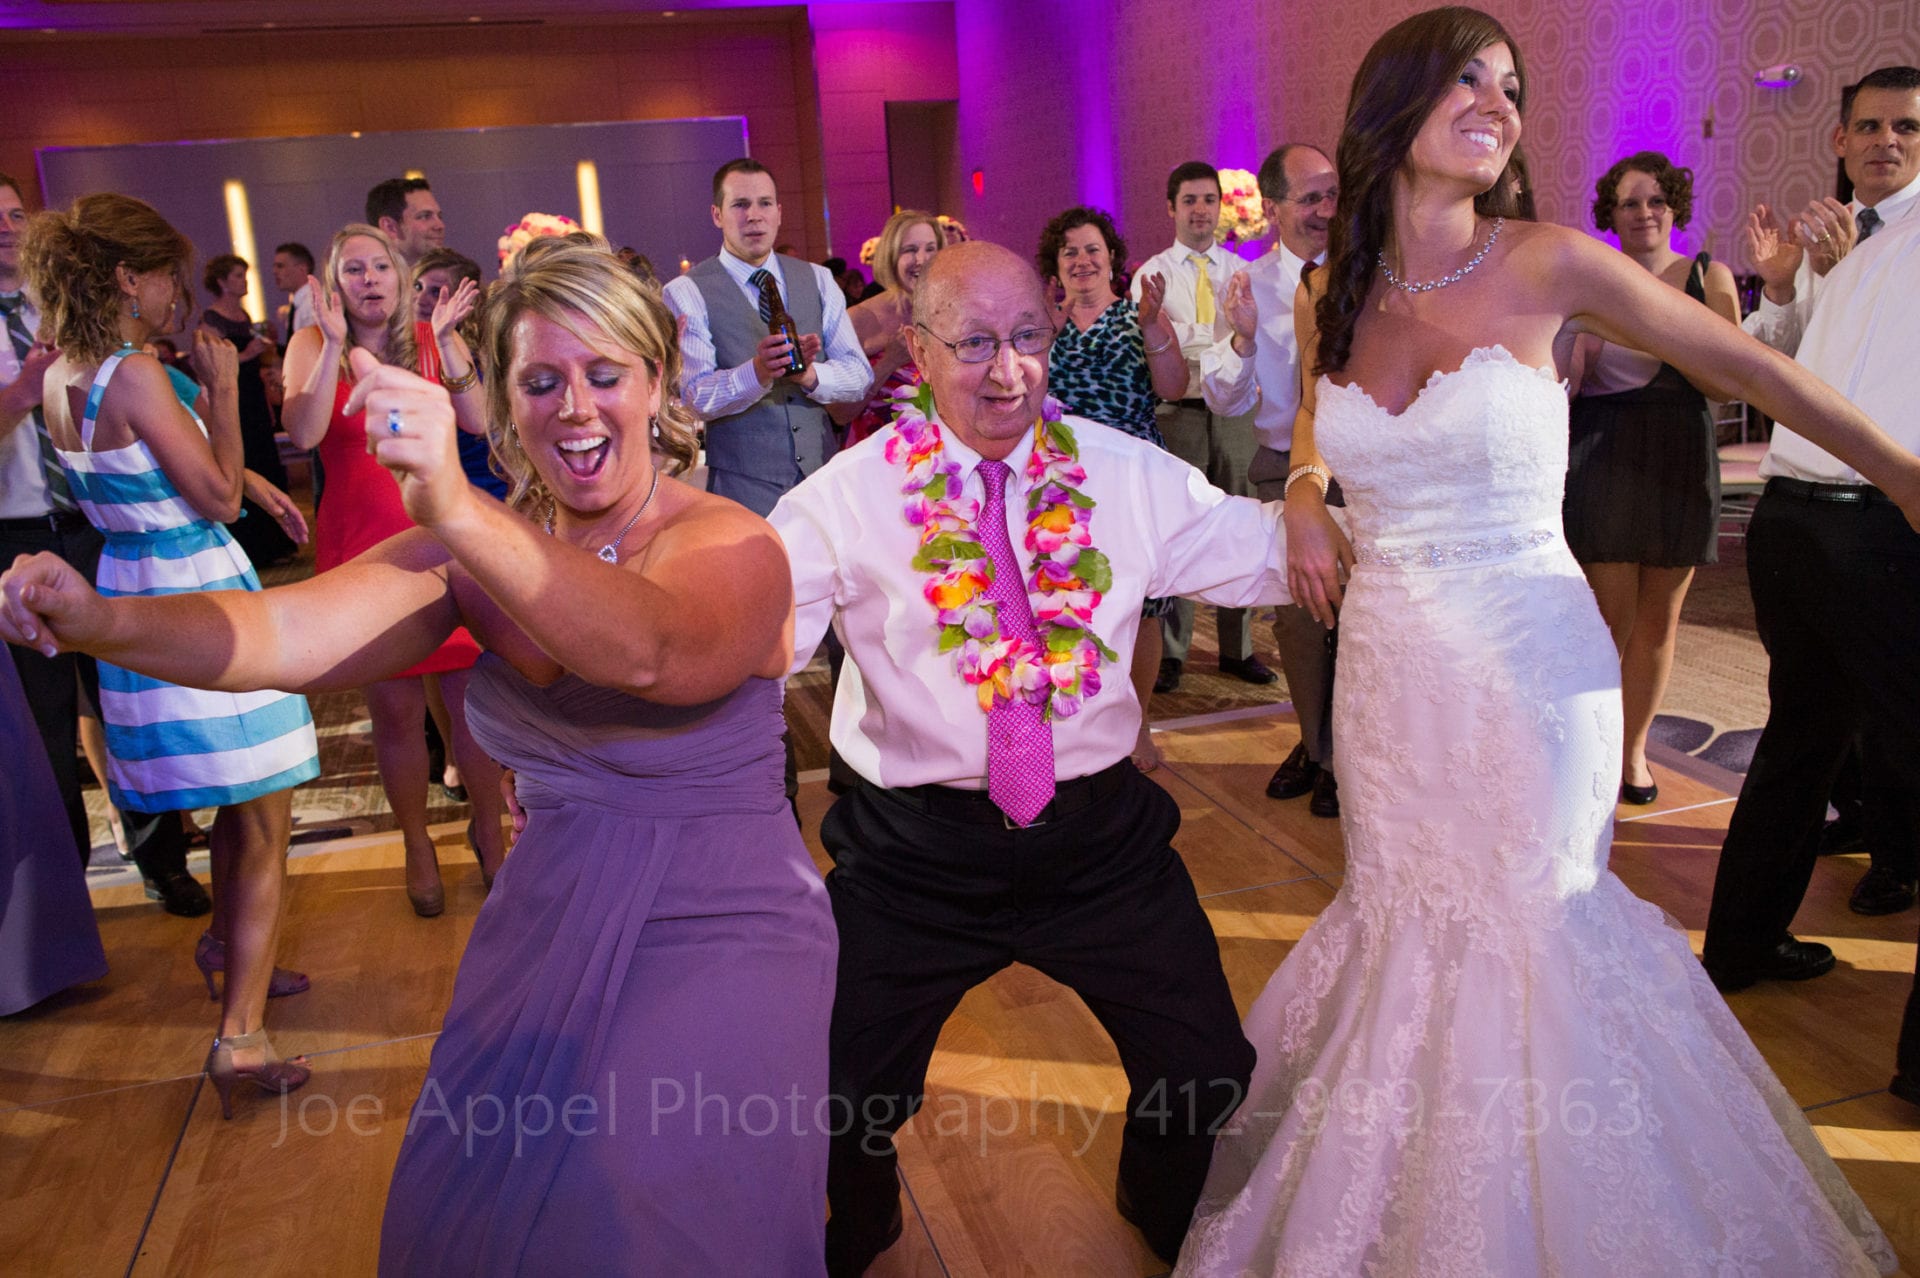 An old man wearing a lei dances with a bride and a bridesmaid in a purple dress Fairmont Hotel Pittsburgh Weddings.